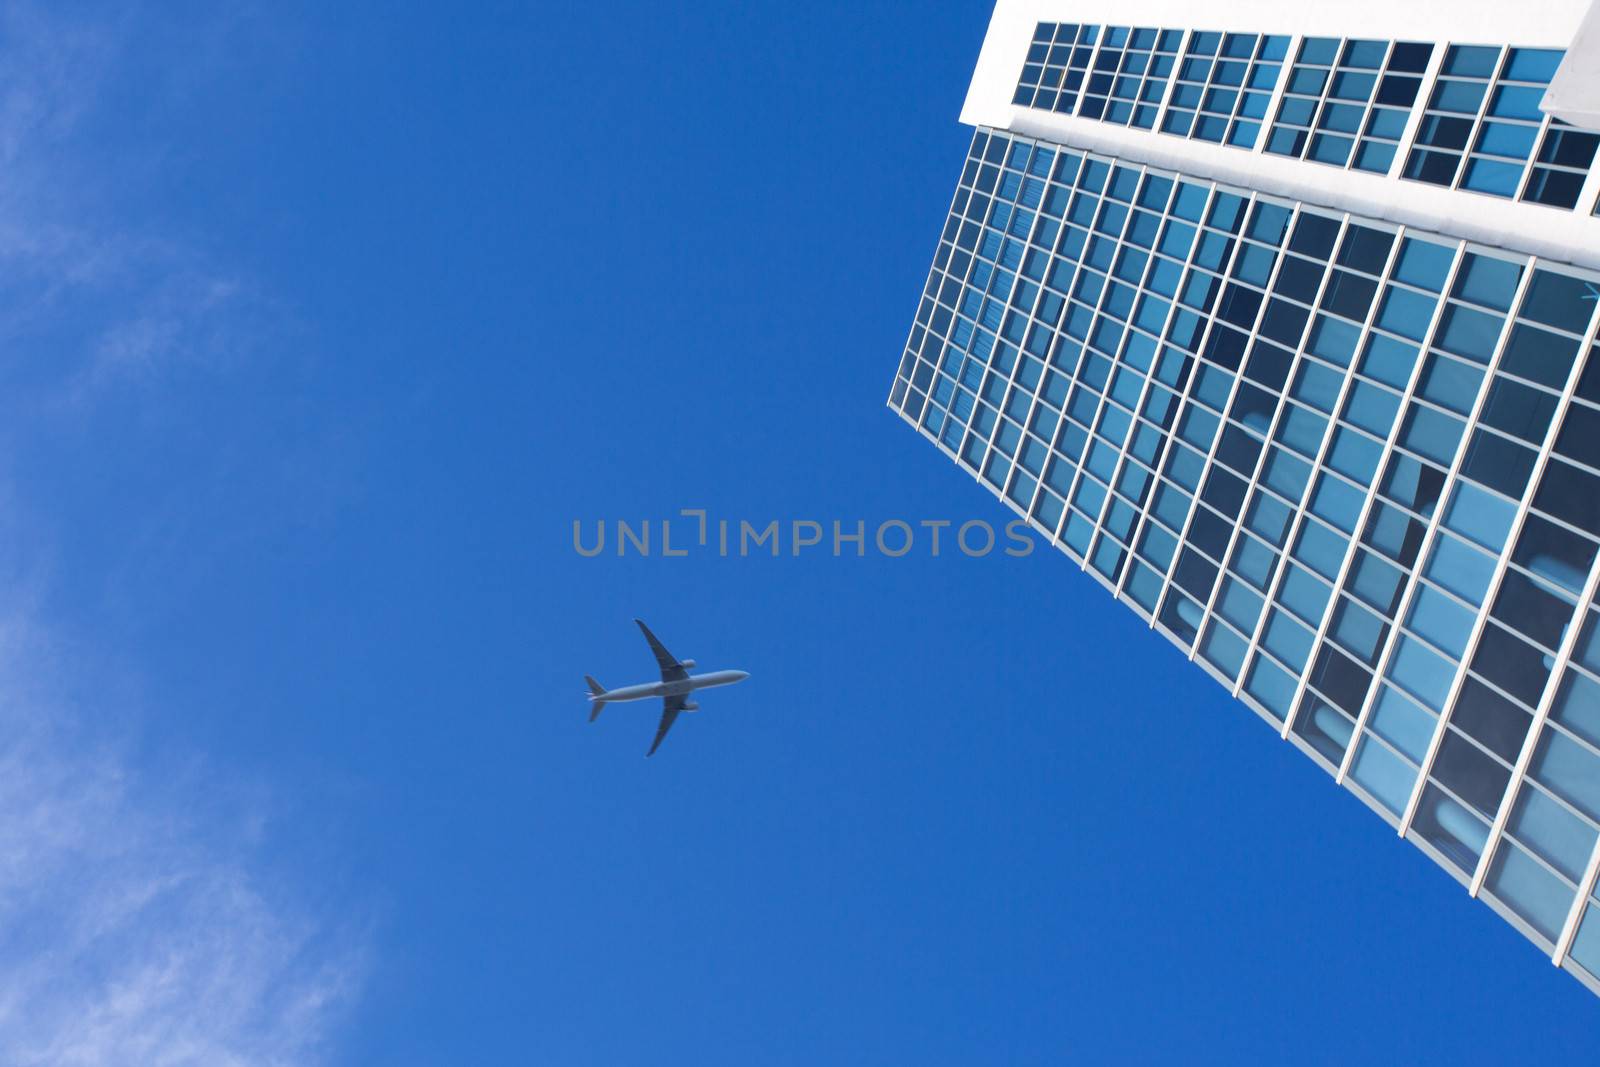 Airplane flying above a skyscraper in the sky of Miami